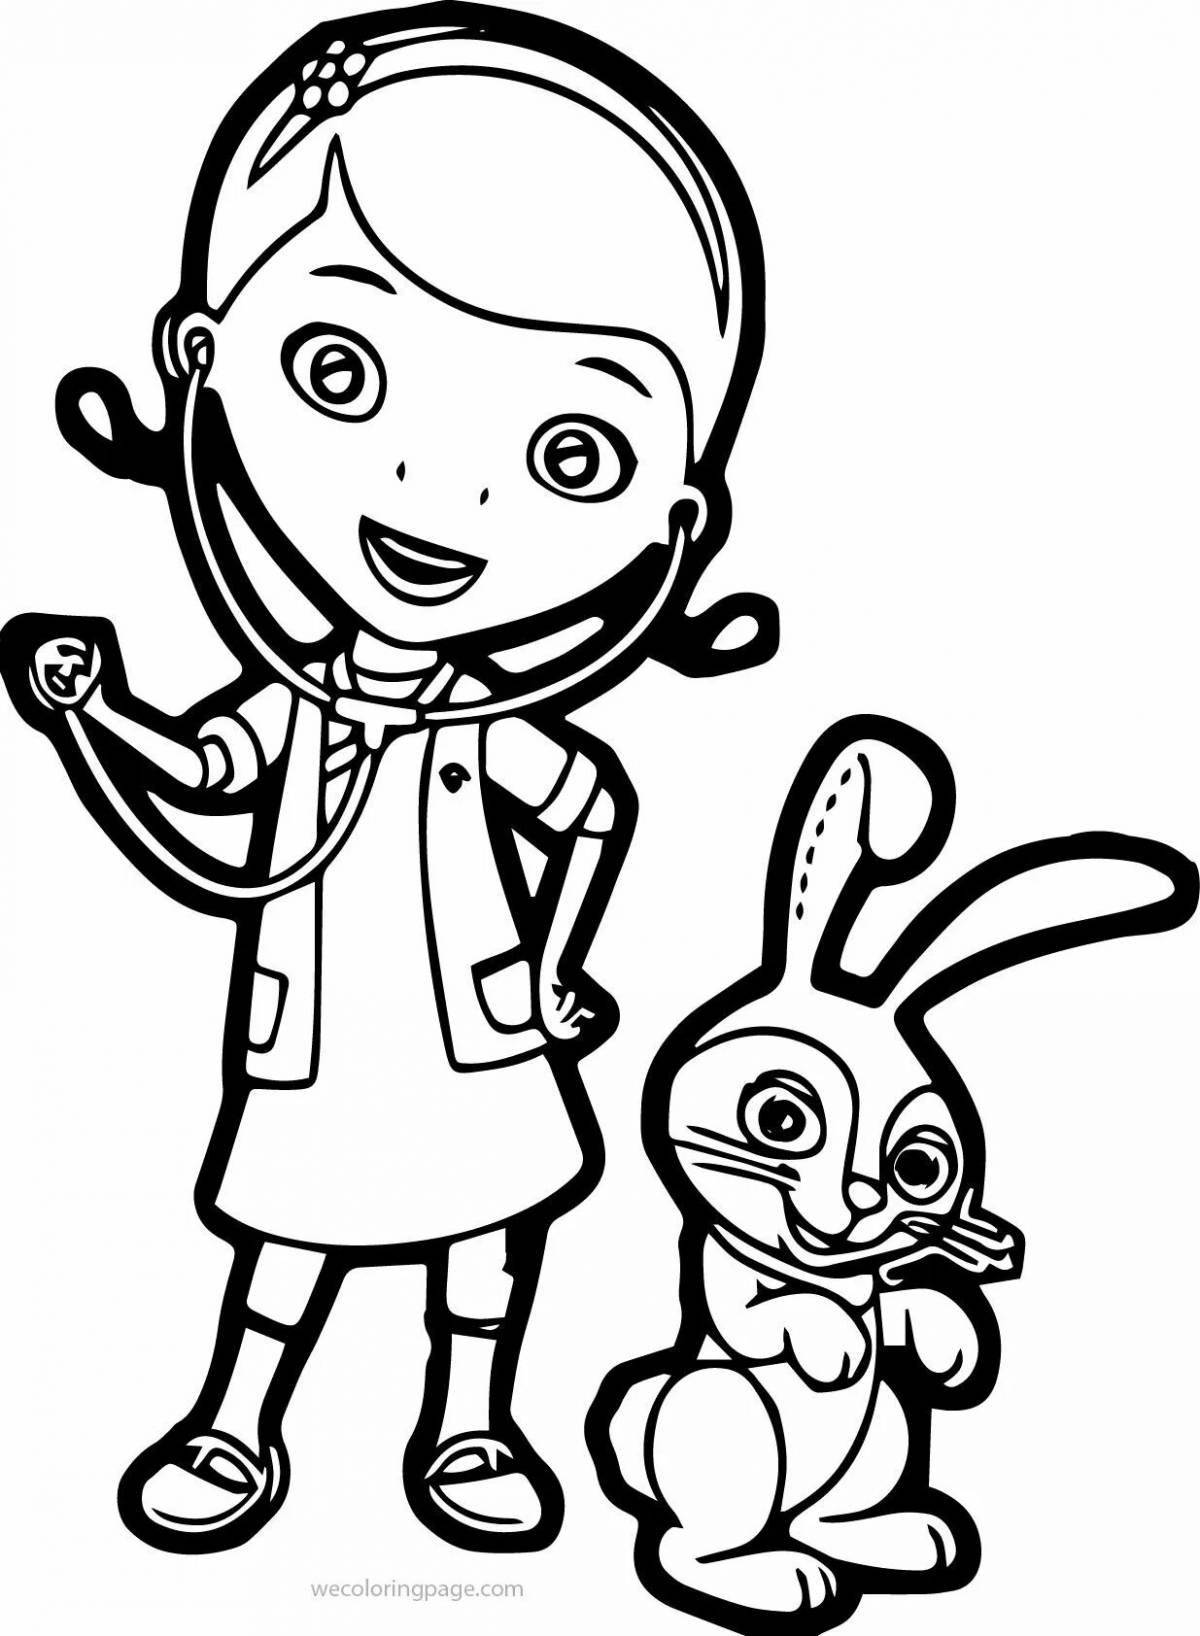 Whimsical plush doctor coloring book for kids